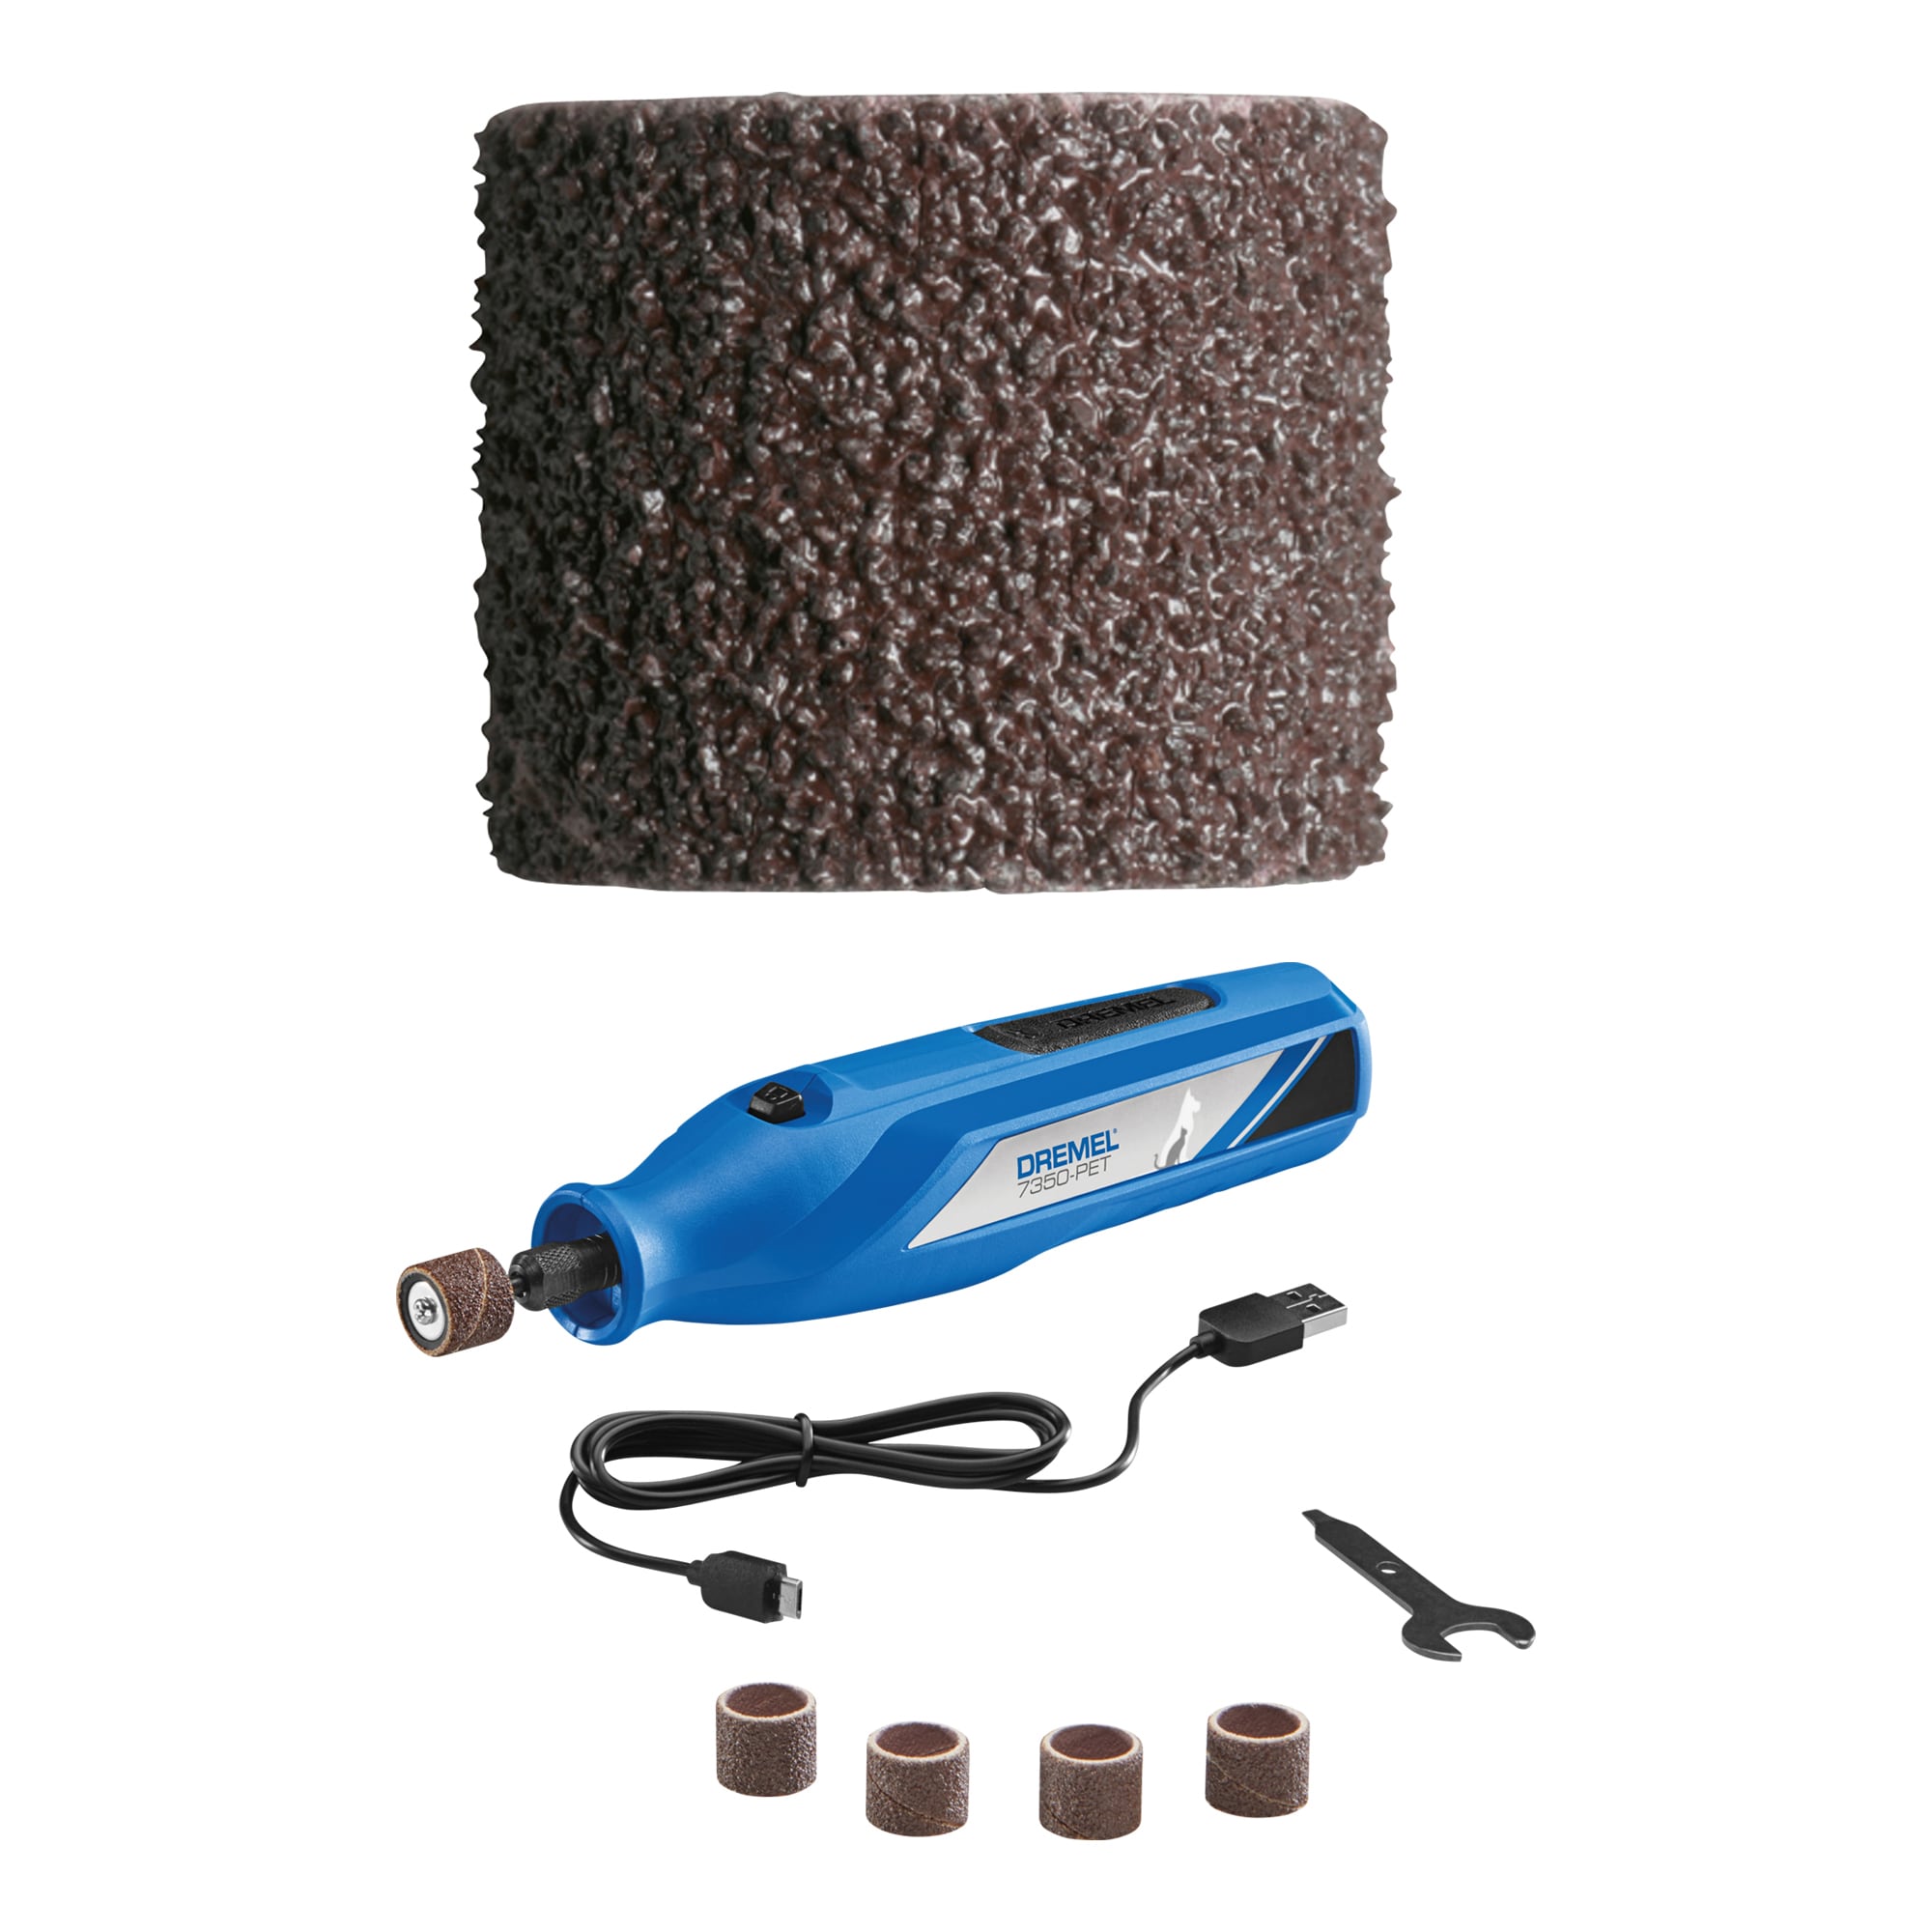 Dremel 7350 4V Pet Grooming Rotary Tool Kit with 5 Accessories + 5 Sanding Bands at Lowes.com